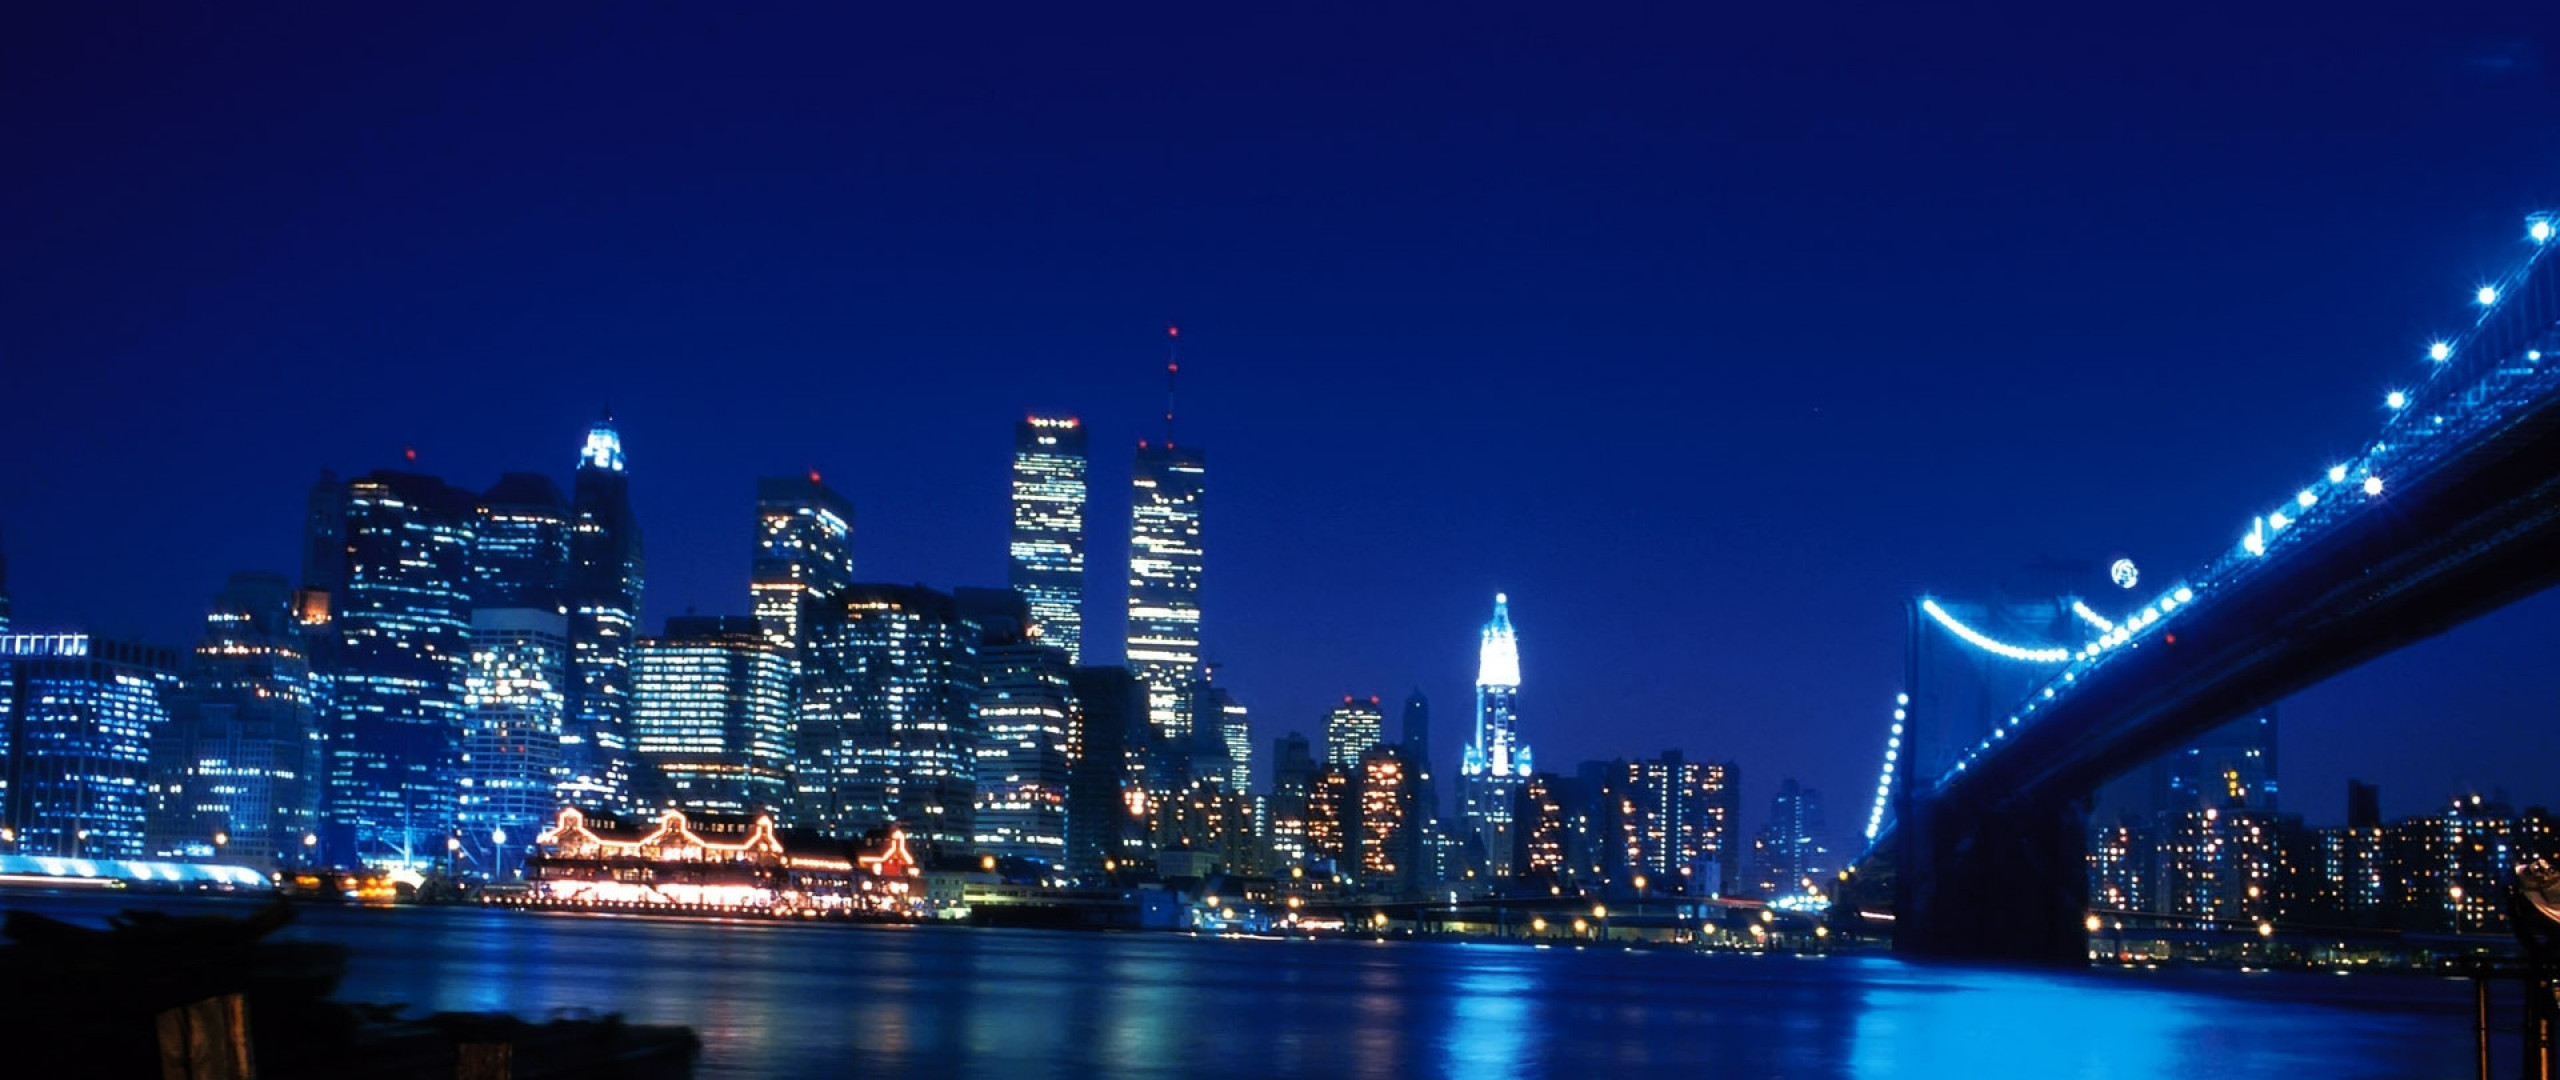 New York Twin Towers Wallpaper Wallpapertag Images, Photos, Reviews